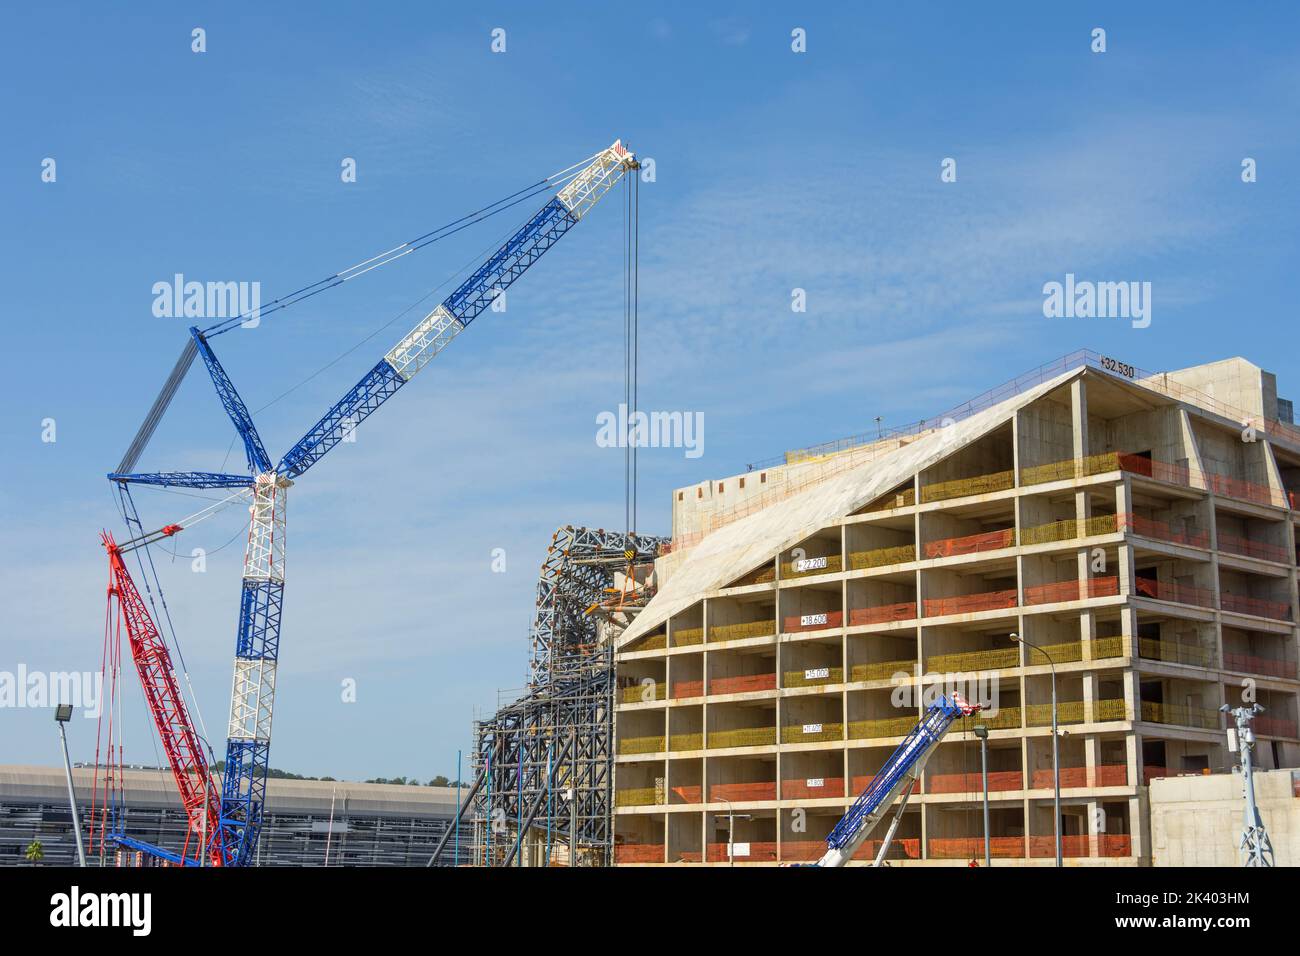 Various cranes, cargo, tower and jib cranes at the construction site Stock Photo